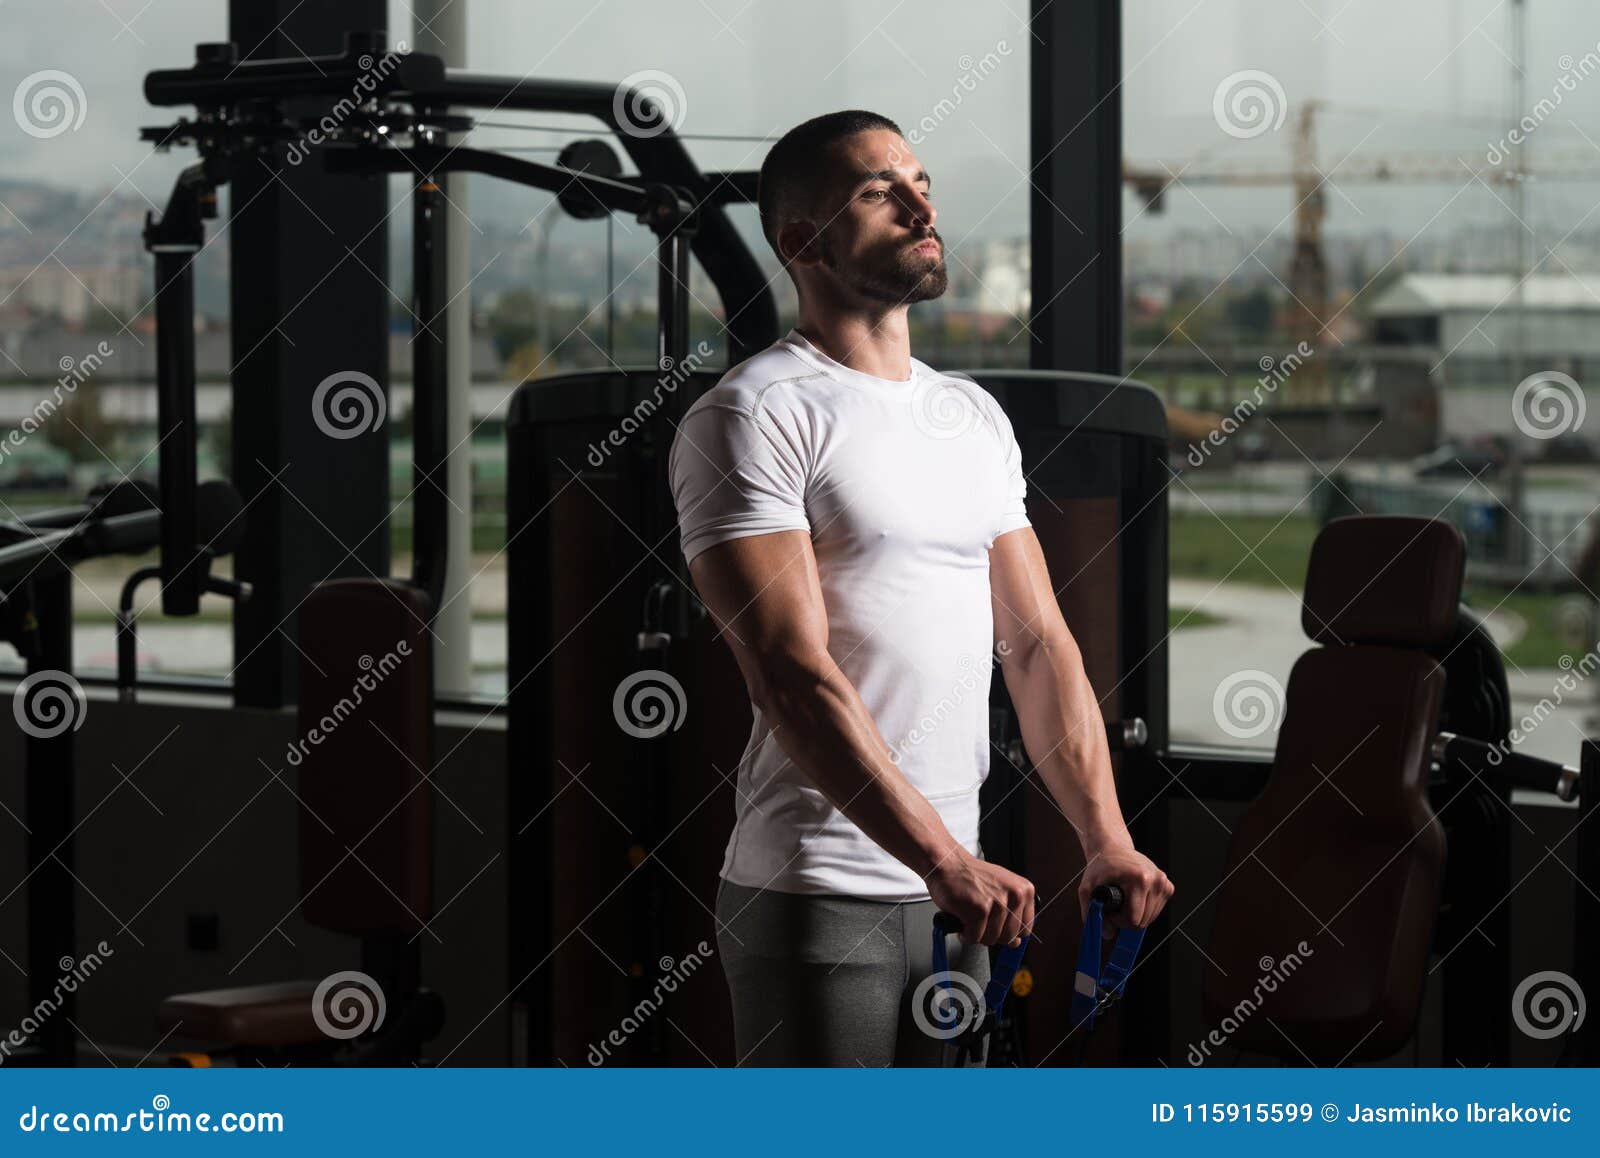 https://thumbs.dreamstime.com/z/shoulder-exercise-pull-rope-elastic-cable-man-gym-exercising-his-shoulders-pull-rope-elastic-cable-gym-115915599.jpg